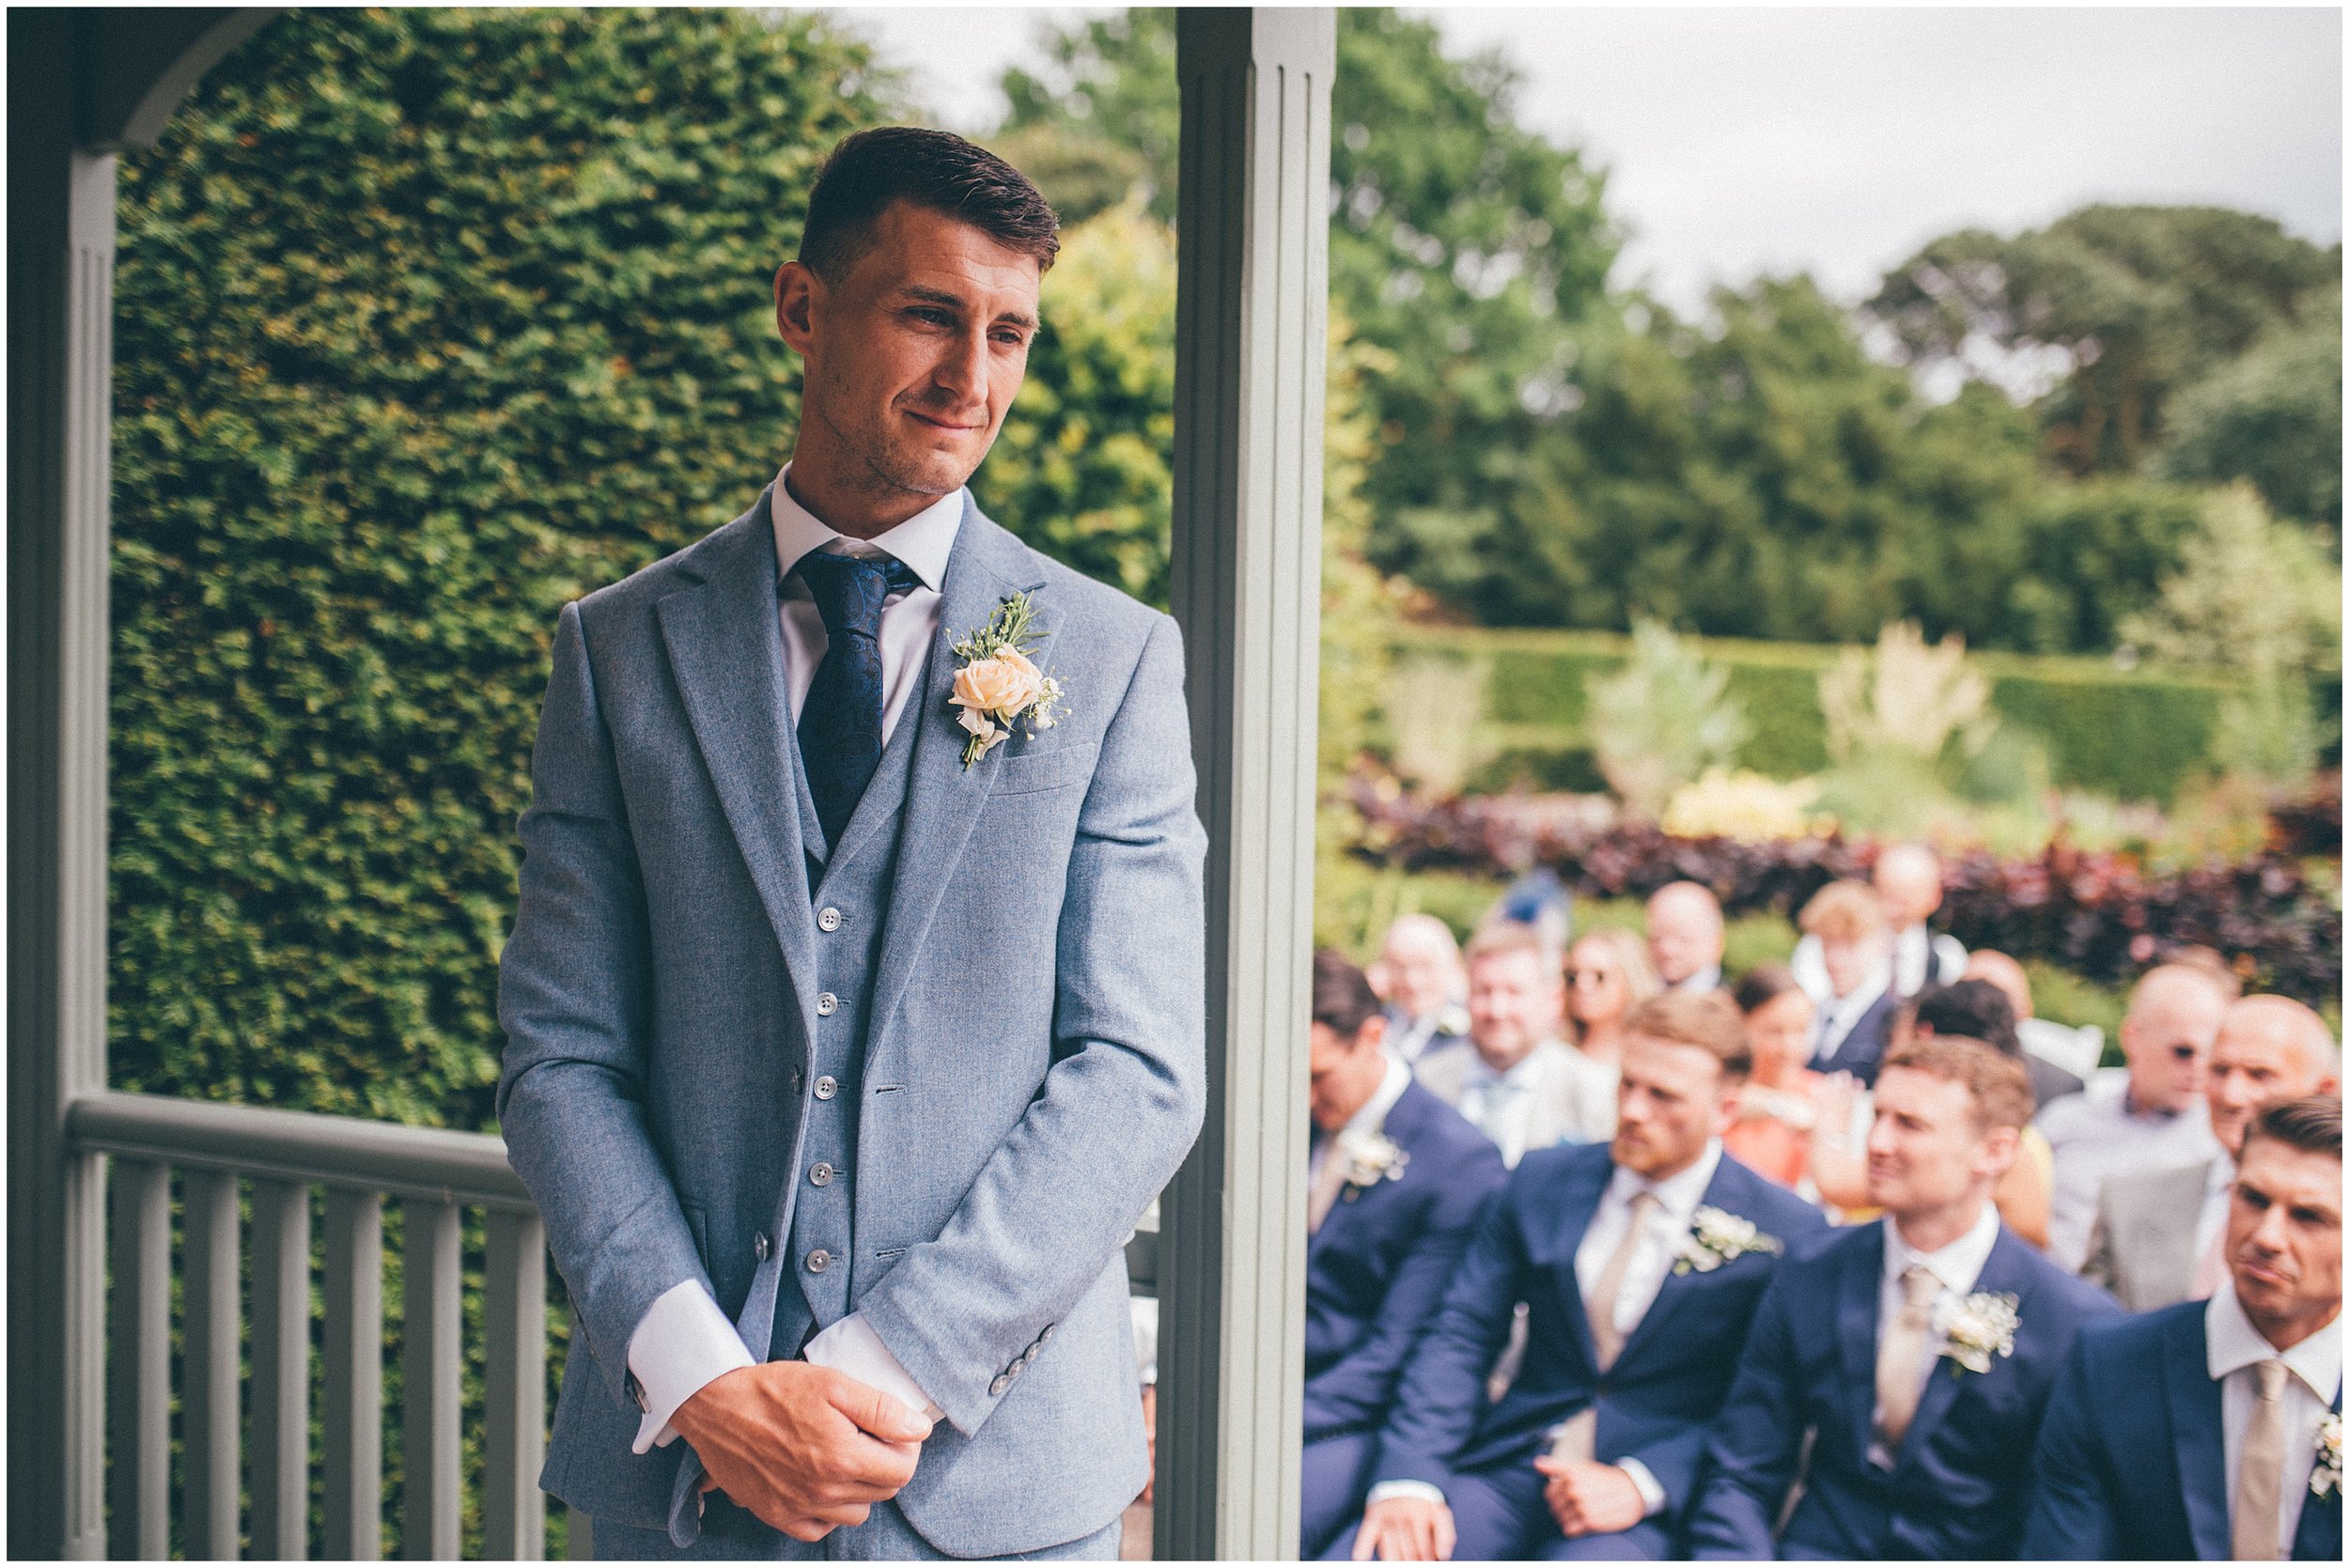 Groom waits for his bride at their outdoor wedding ceremony at Abbeywood Estate wedding venue in Delamere, Cheshire